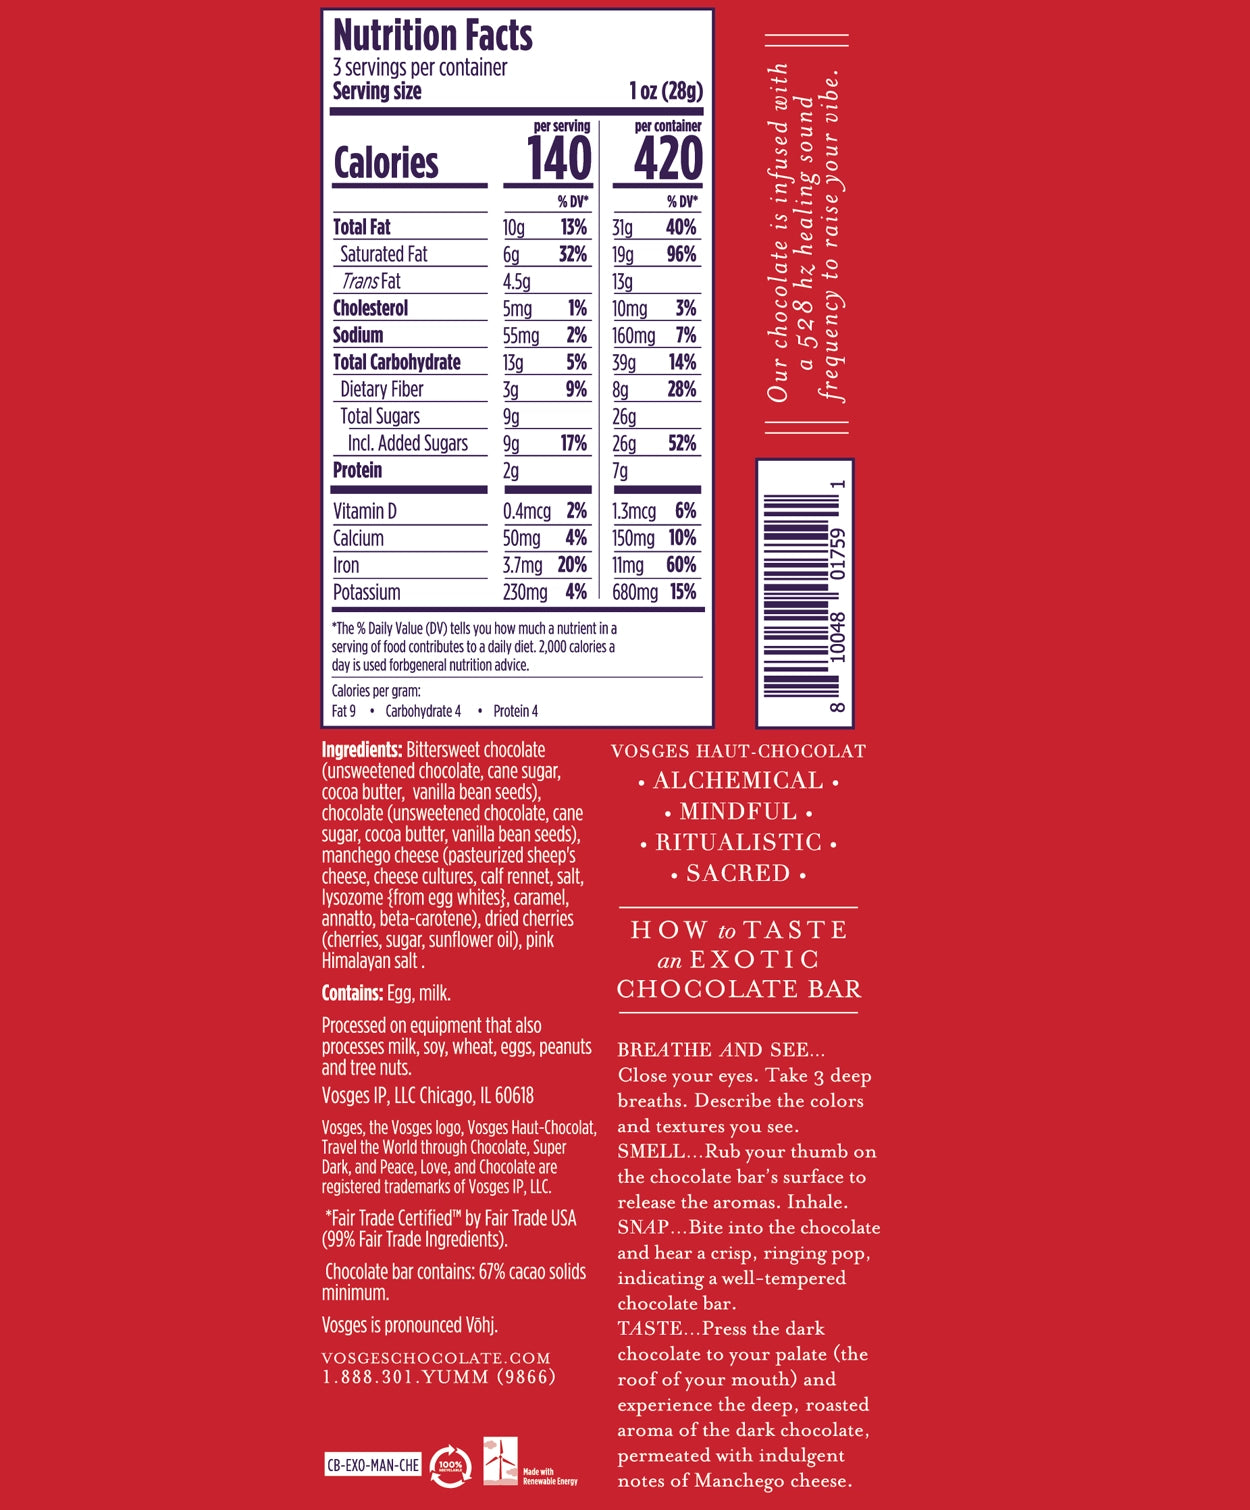 Nutrition Facts and Ingredients of Vosges Haut-Chocolat Manchego and Cherry bar in white, san-serif font on a bright red background.